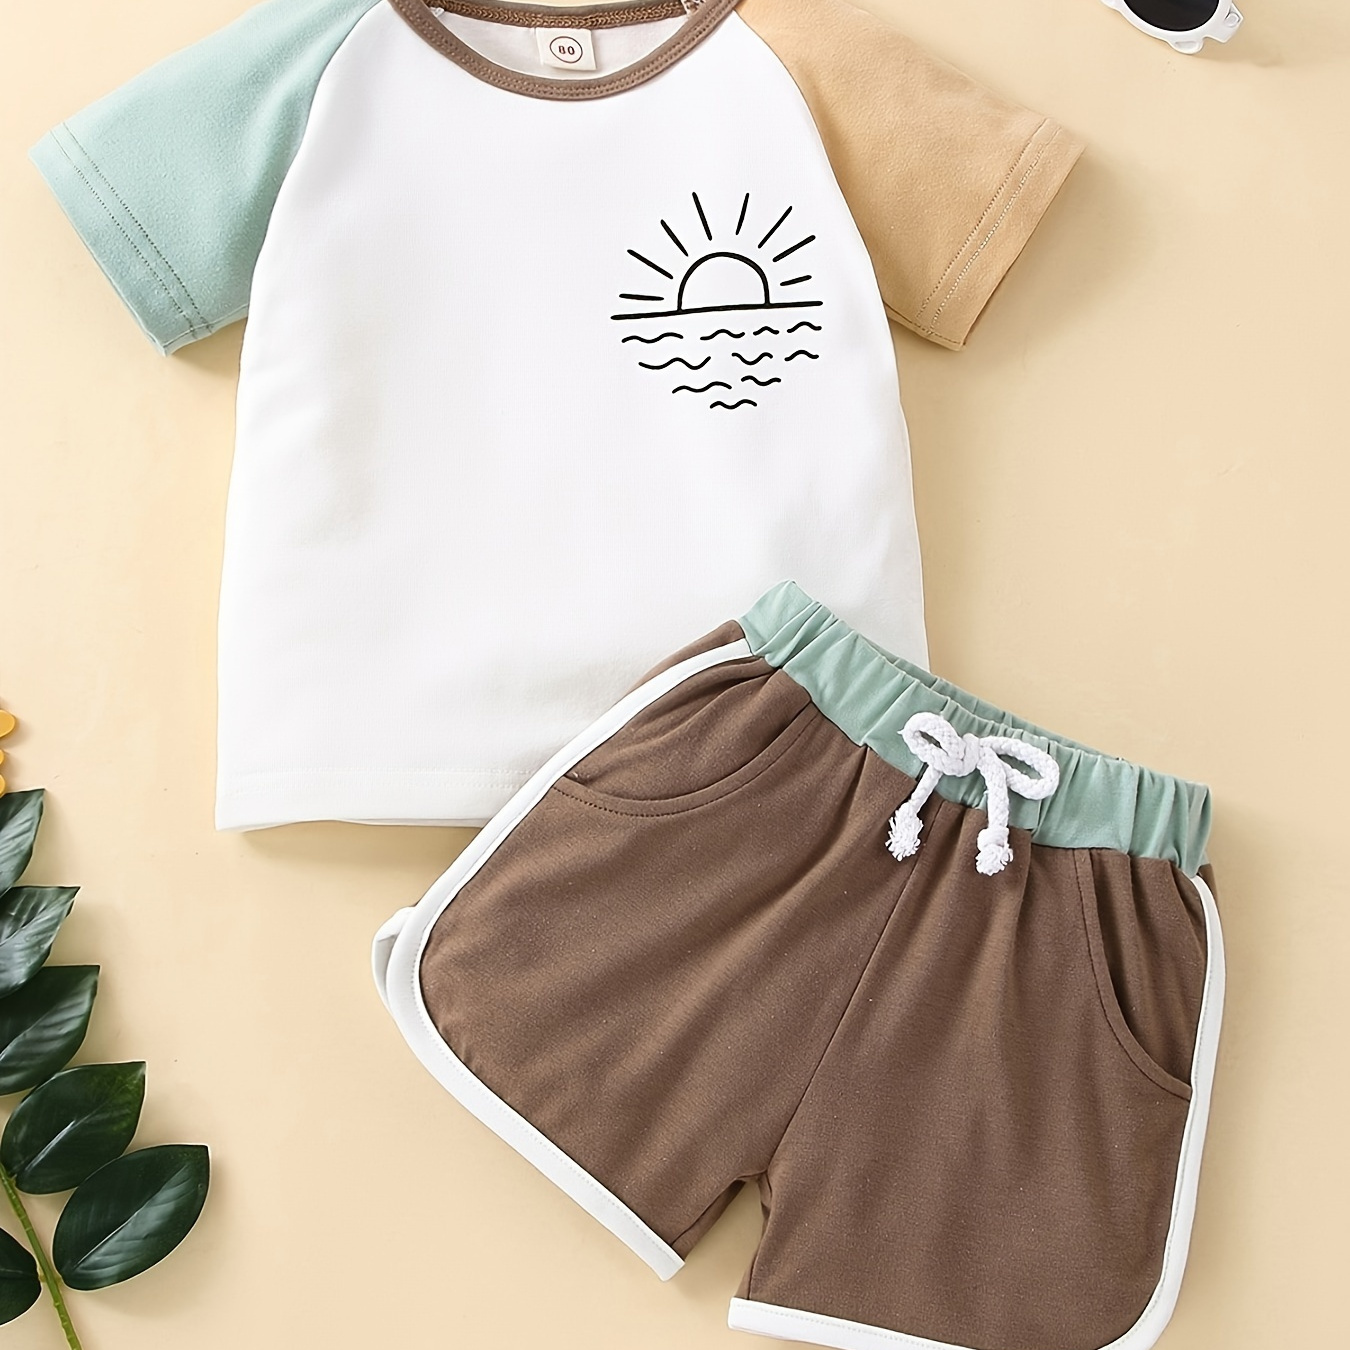 

Toddler Baby Boy's 2-piece Casual Sunrise Pattern Short Sleeve T-shirt And Drawstring Shorts Set, Spring Summer Outfit – Comfortable & Stylish